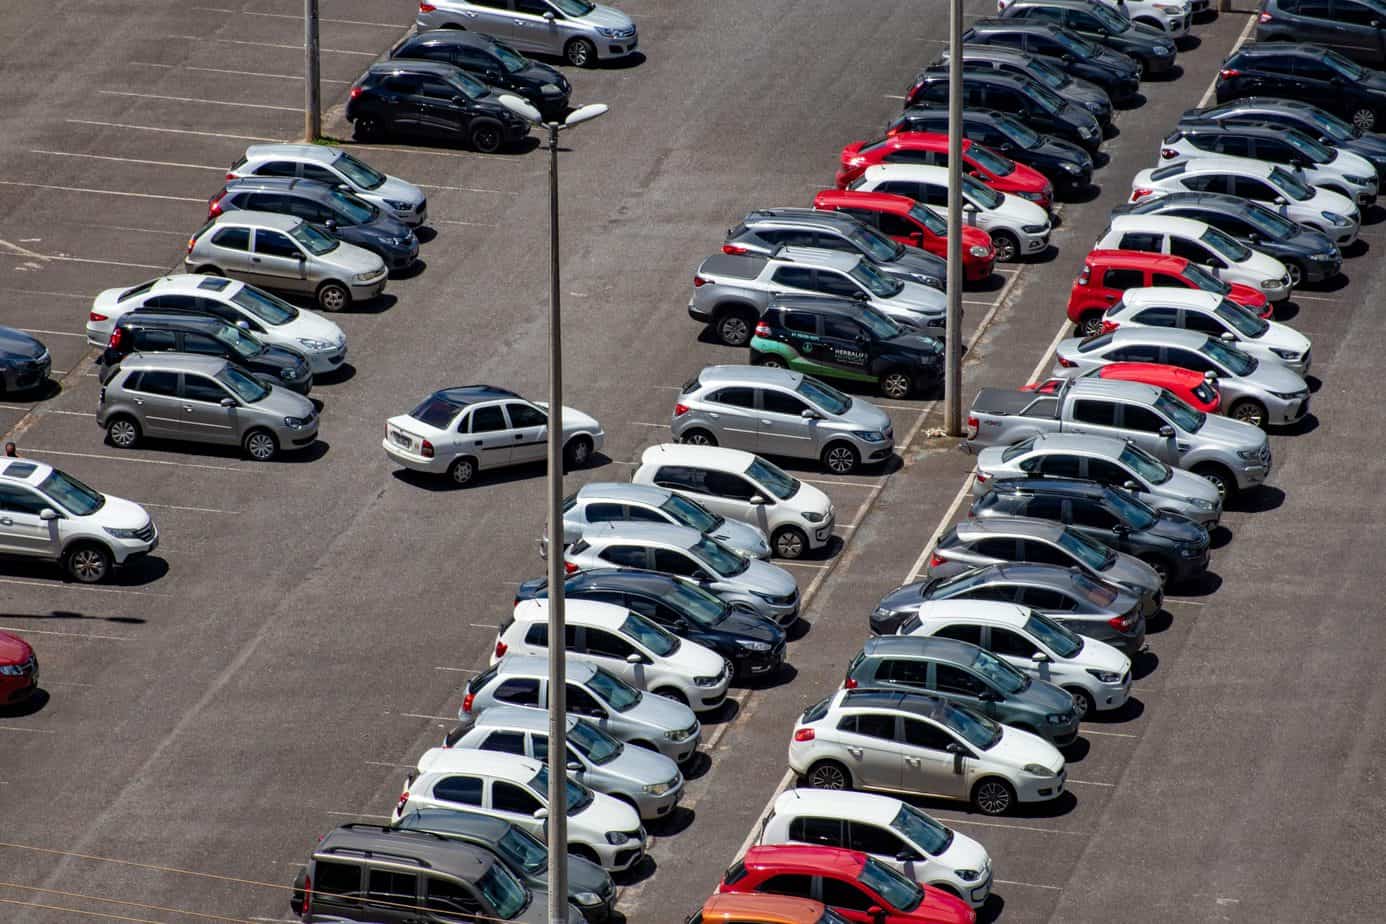 How to Save Costs on Parking at the Airport?